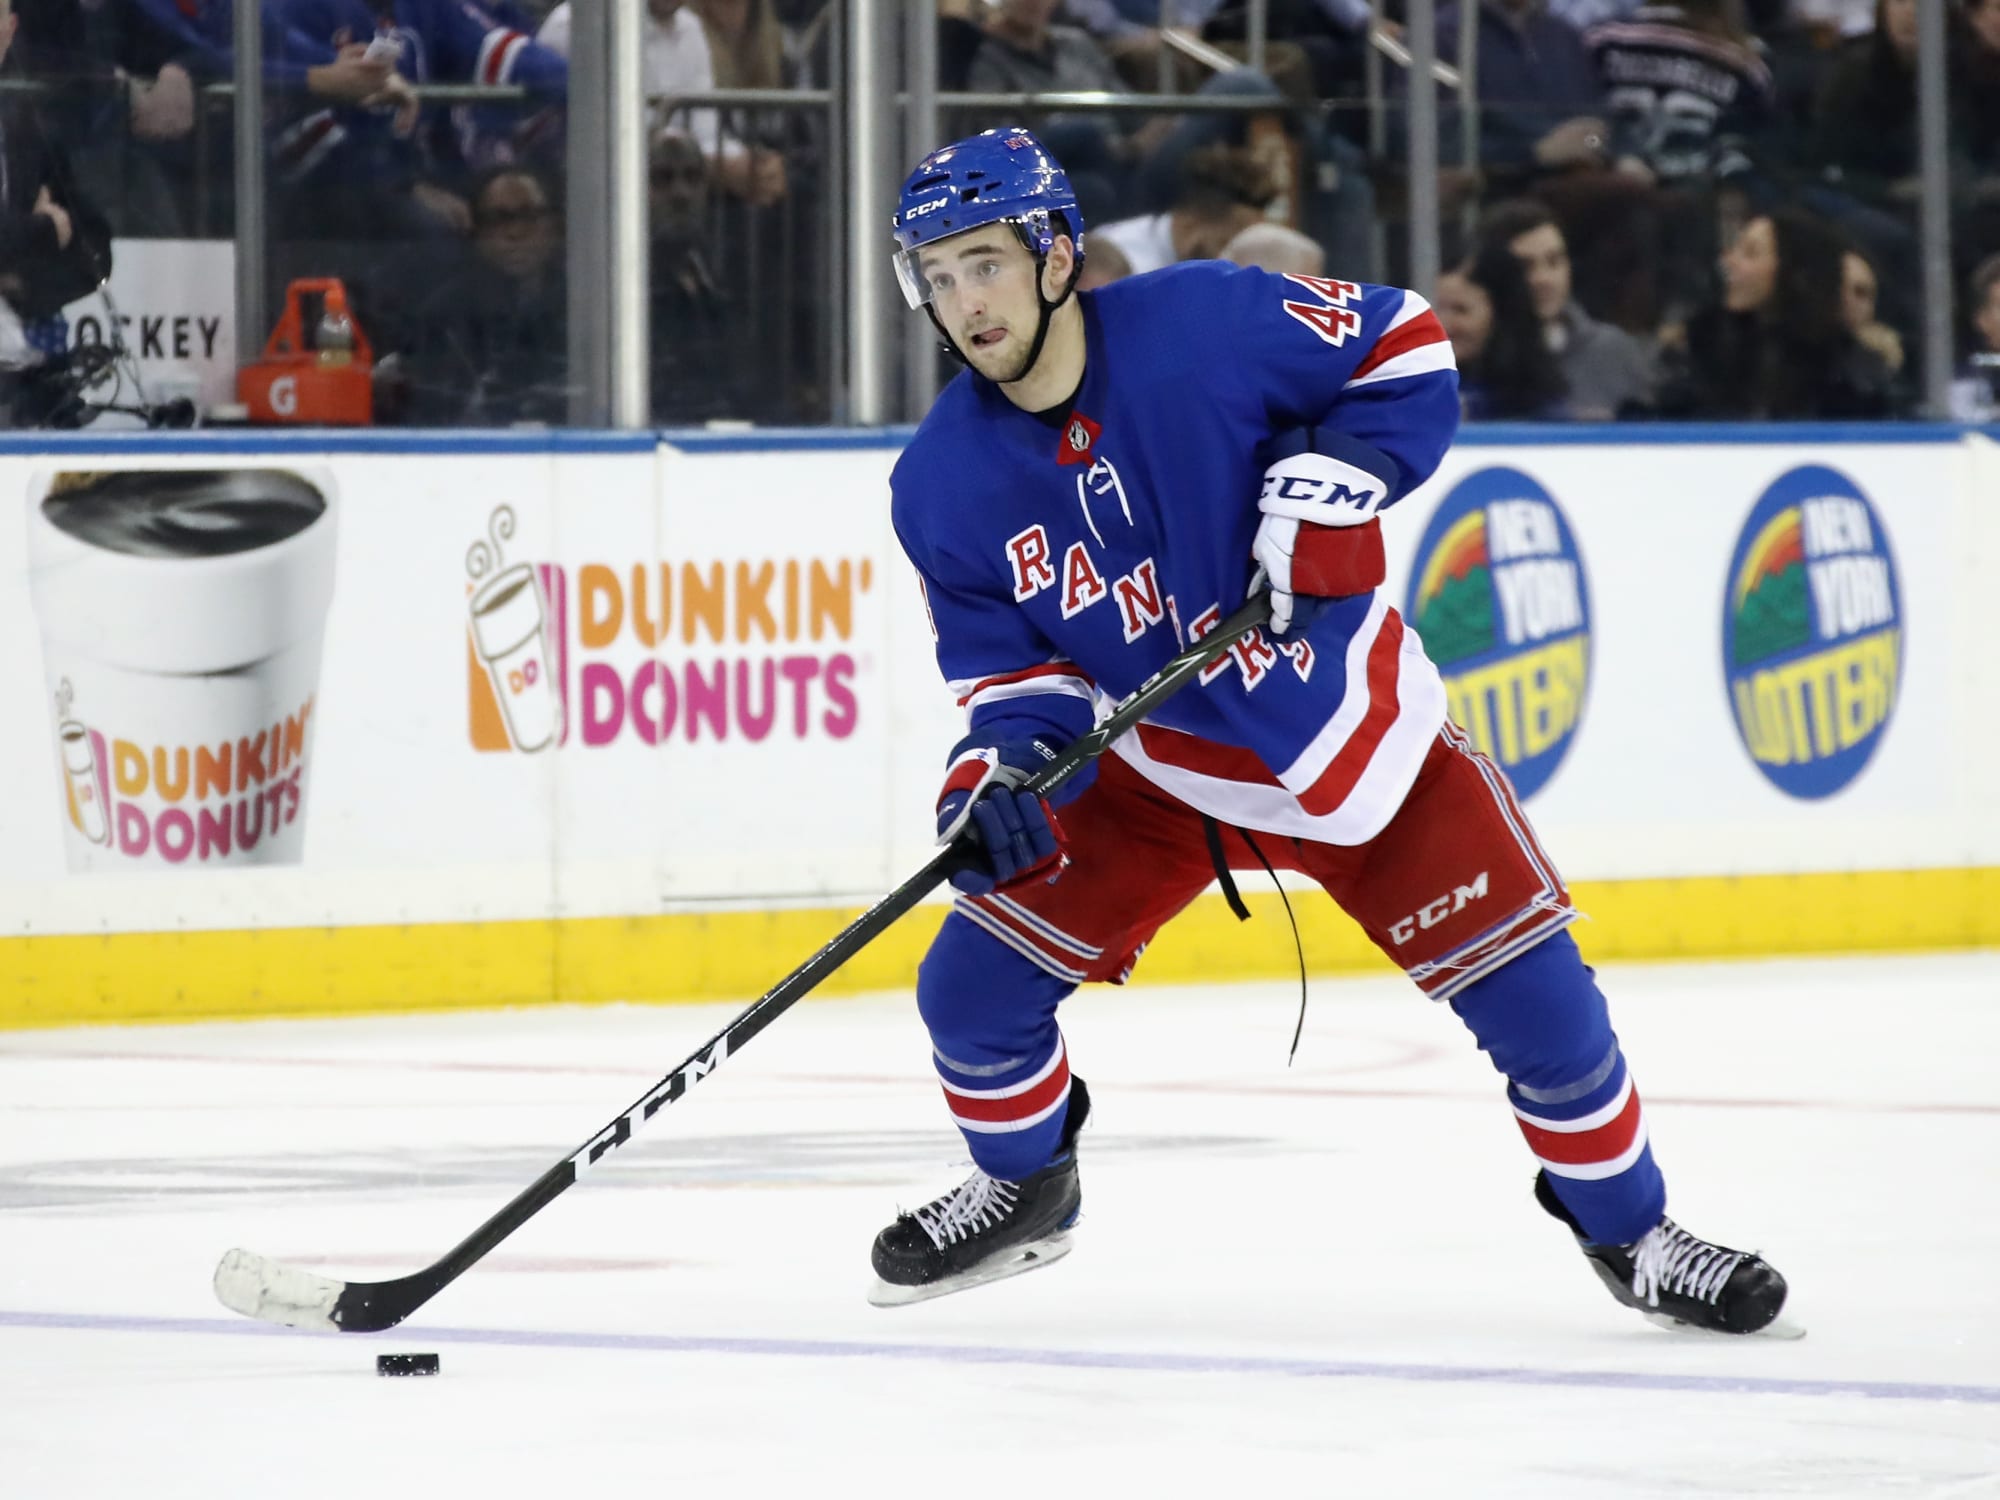 New York Rangers: Comparing Pionk’s rookie numbers to other defensemen’s